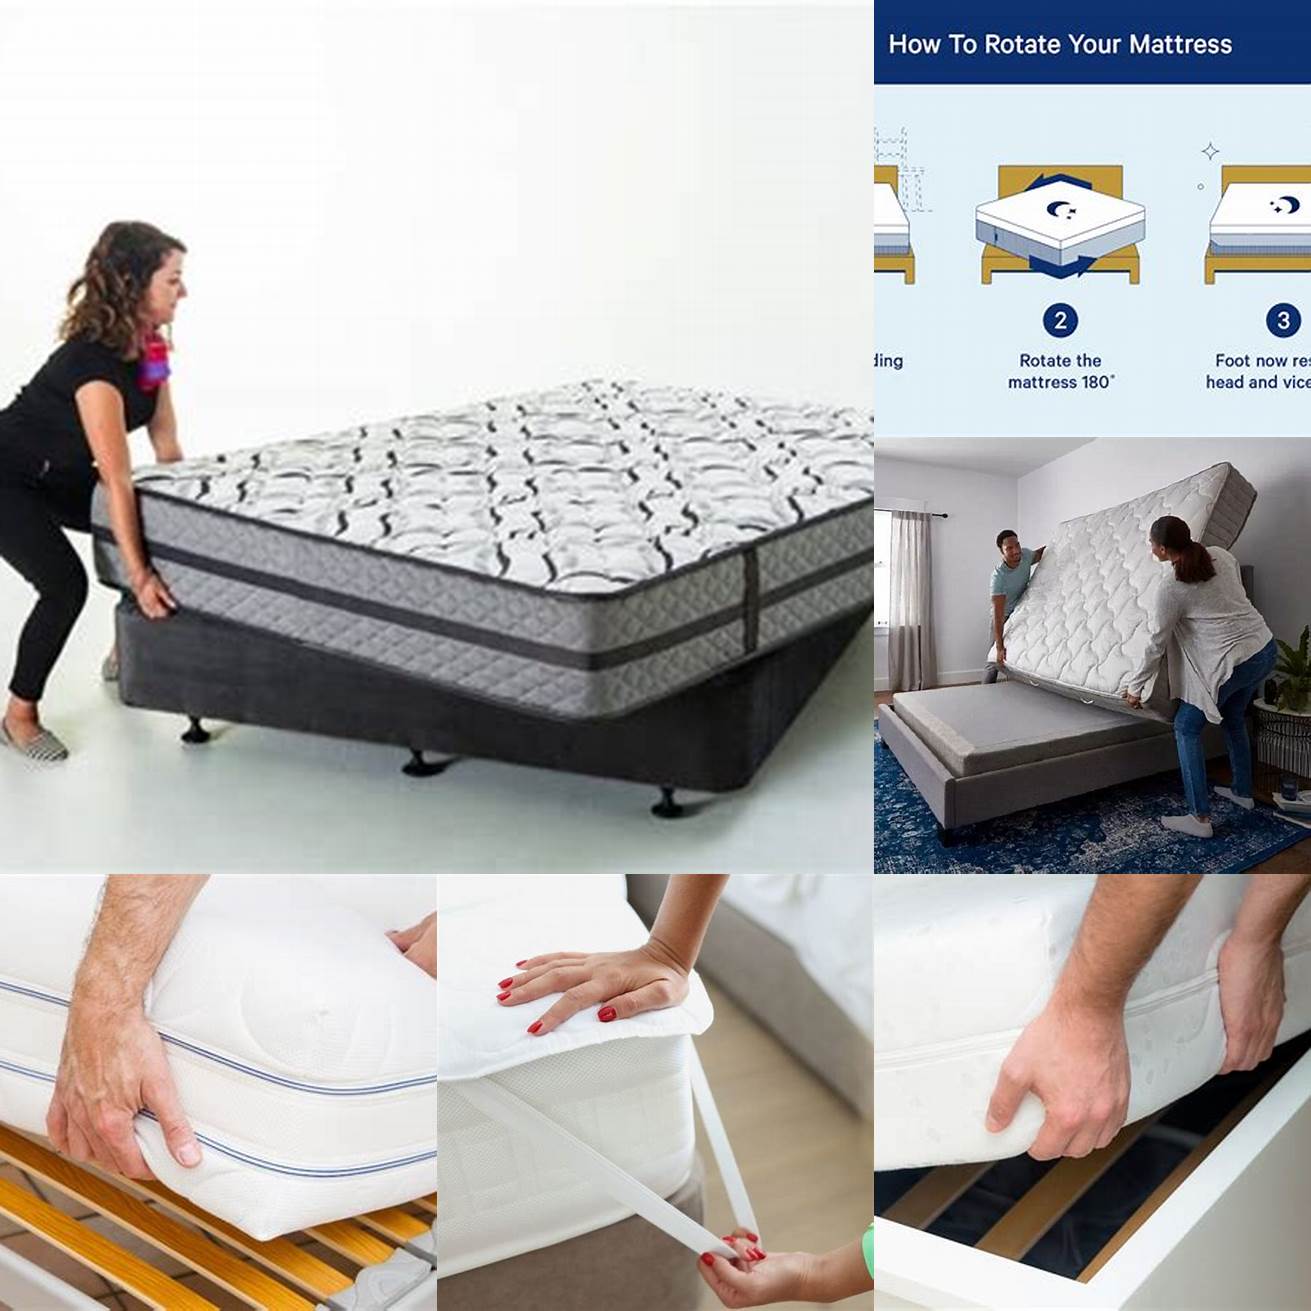 Rotate your mattress regularly to ensure even wear and tear